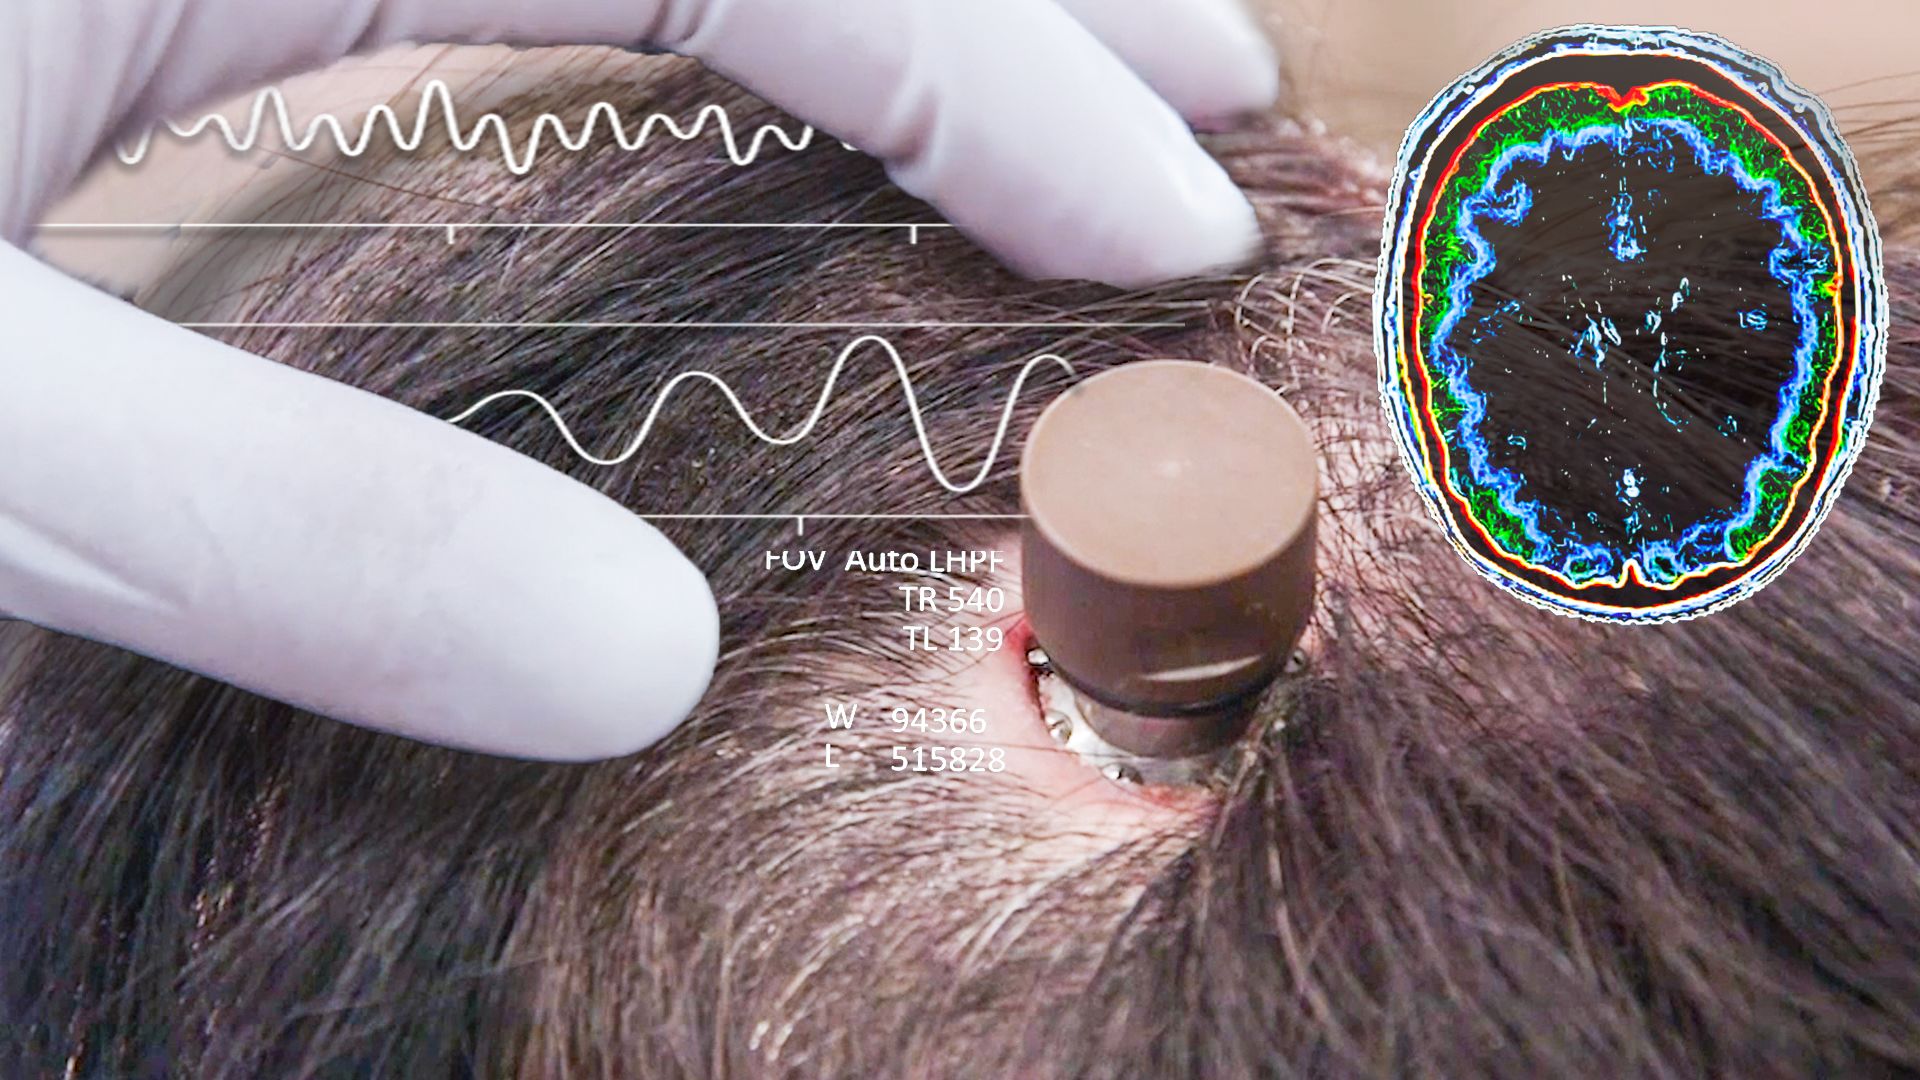 wired_wired-news-and-science-the-science-behind-elon-musks-neuralink-brain-chip.jpg